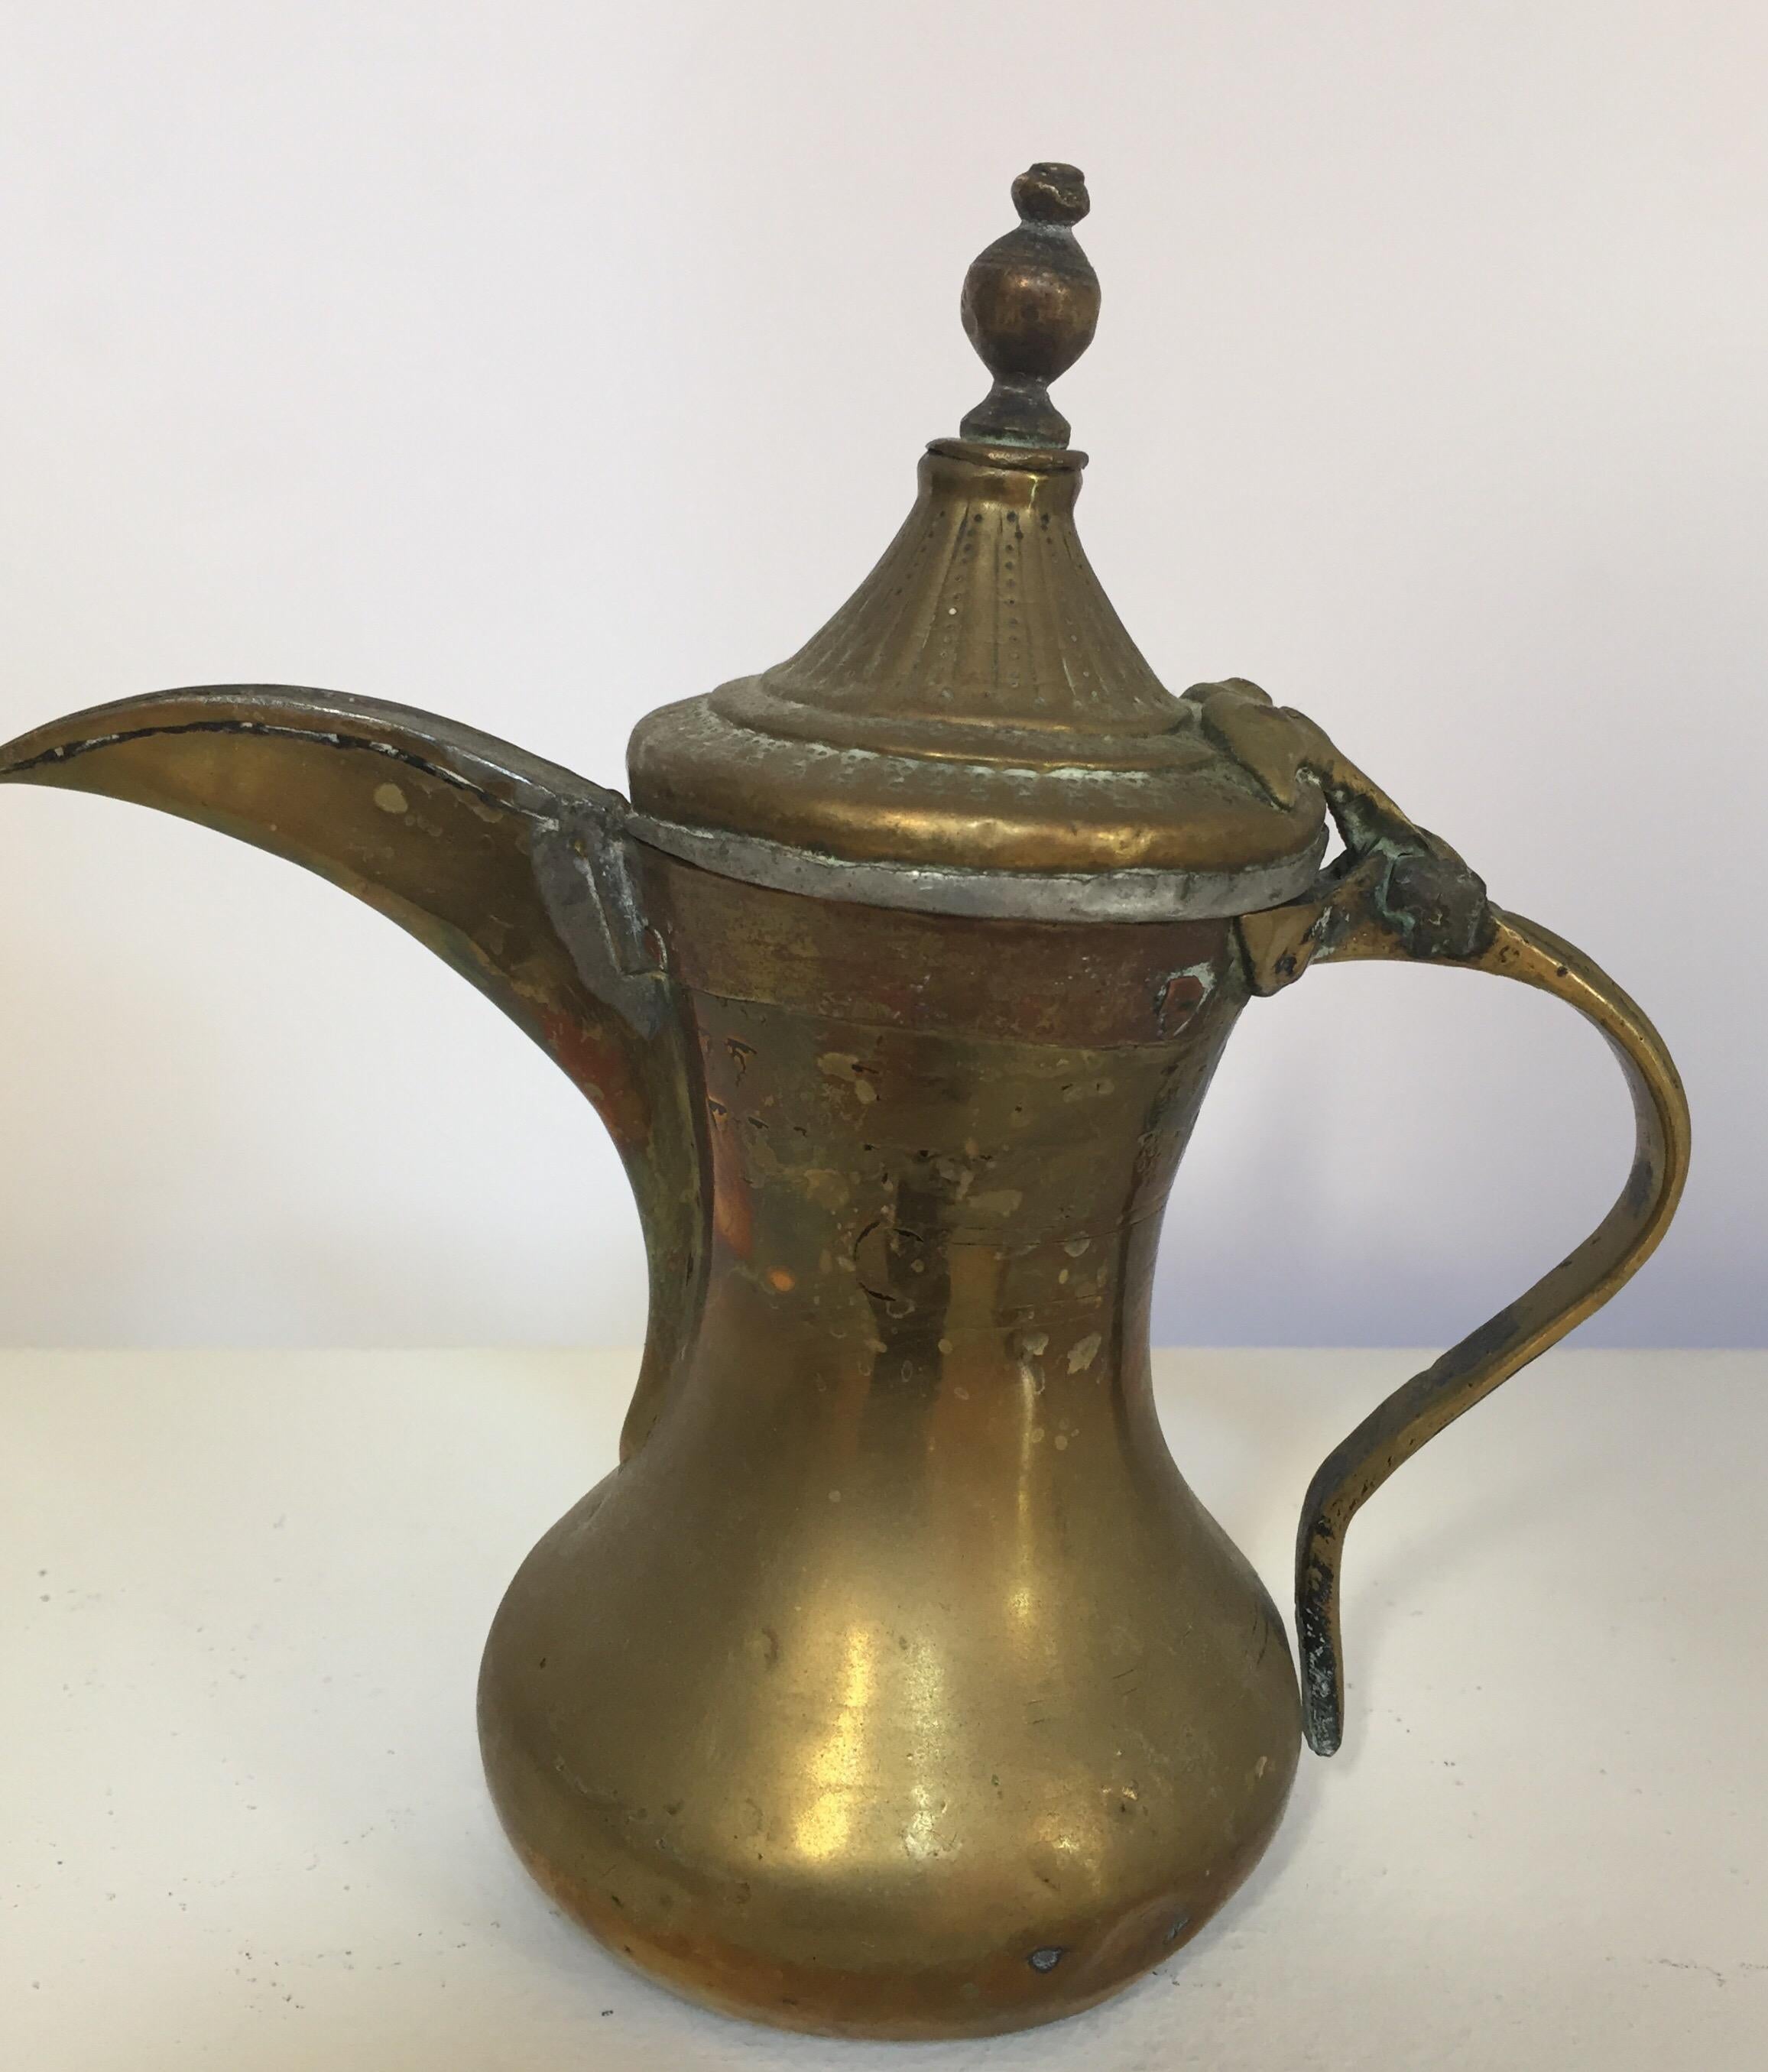 Middle Eastern traditional Arabian tinned copper and brass Dallah coffee pot.
Coffee pot hand-hammered and chased copper with riveted brass finish and a very large spout.
Size: 9